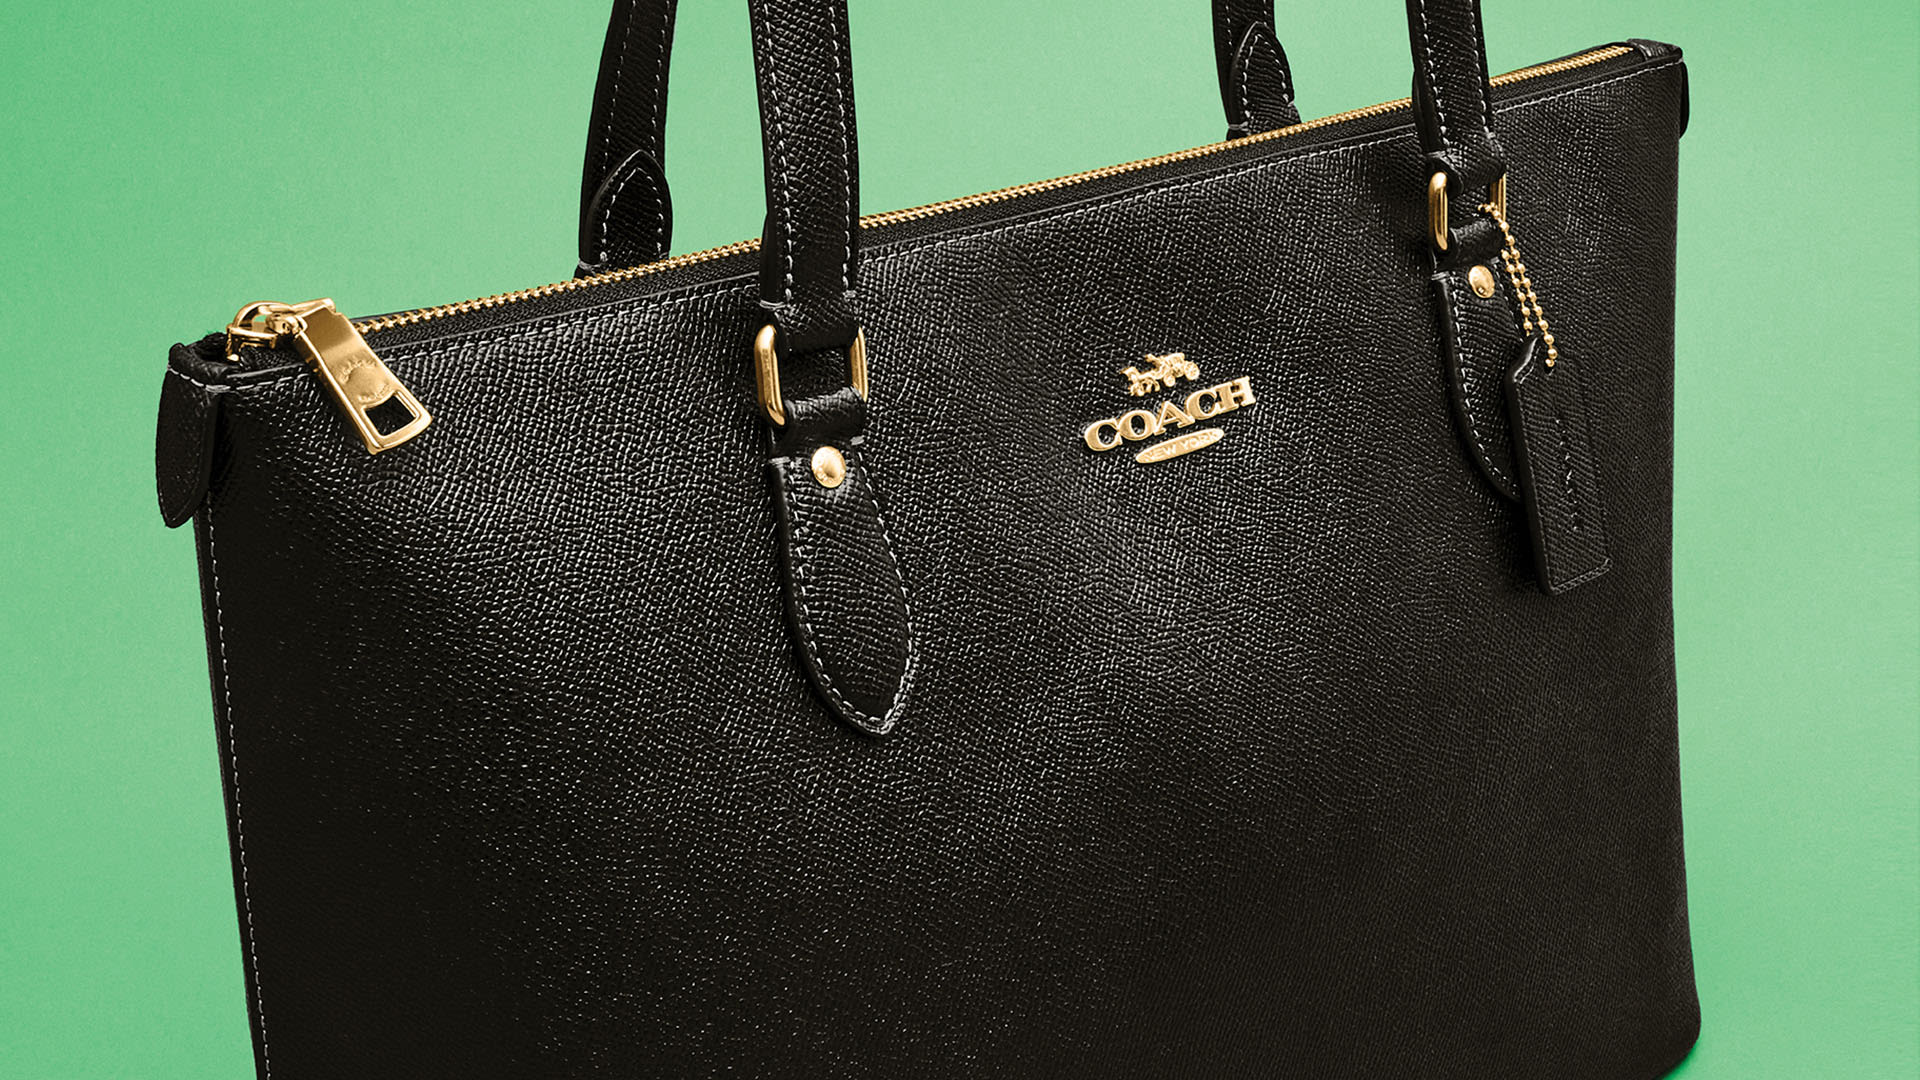 Coach Bags Outlet | Handbags Outlet in Ireland | Kildare Village